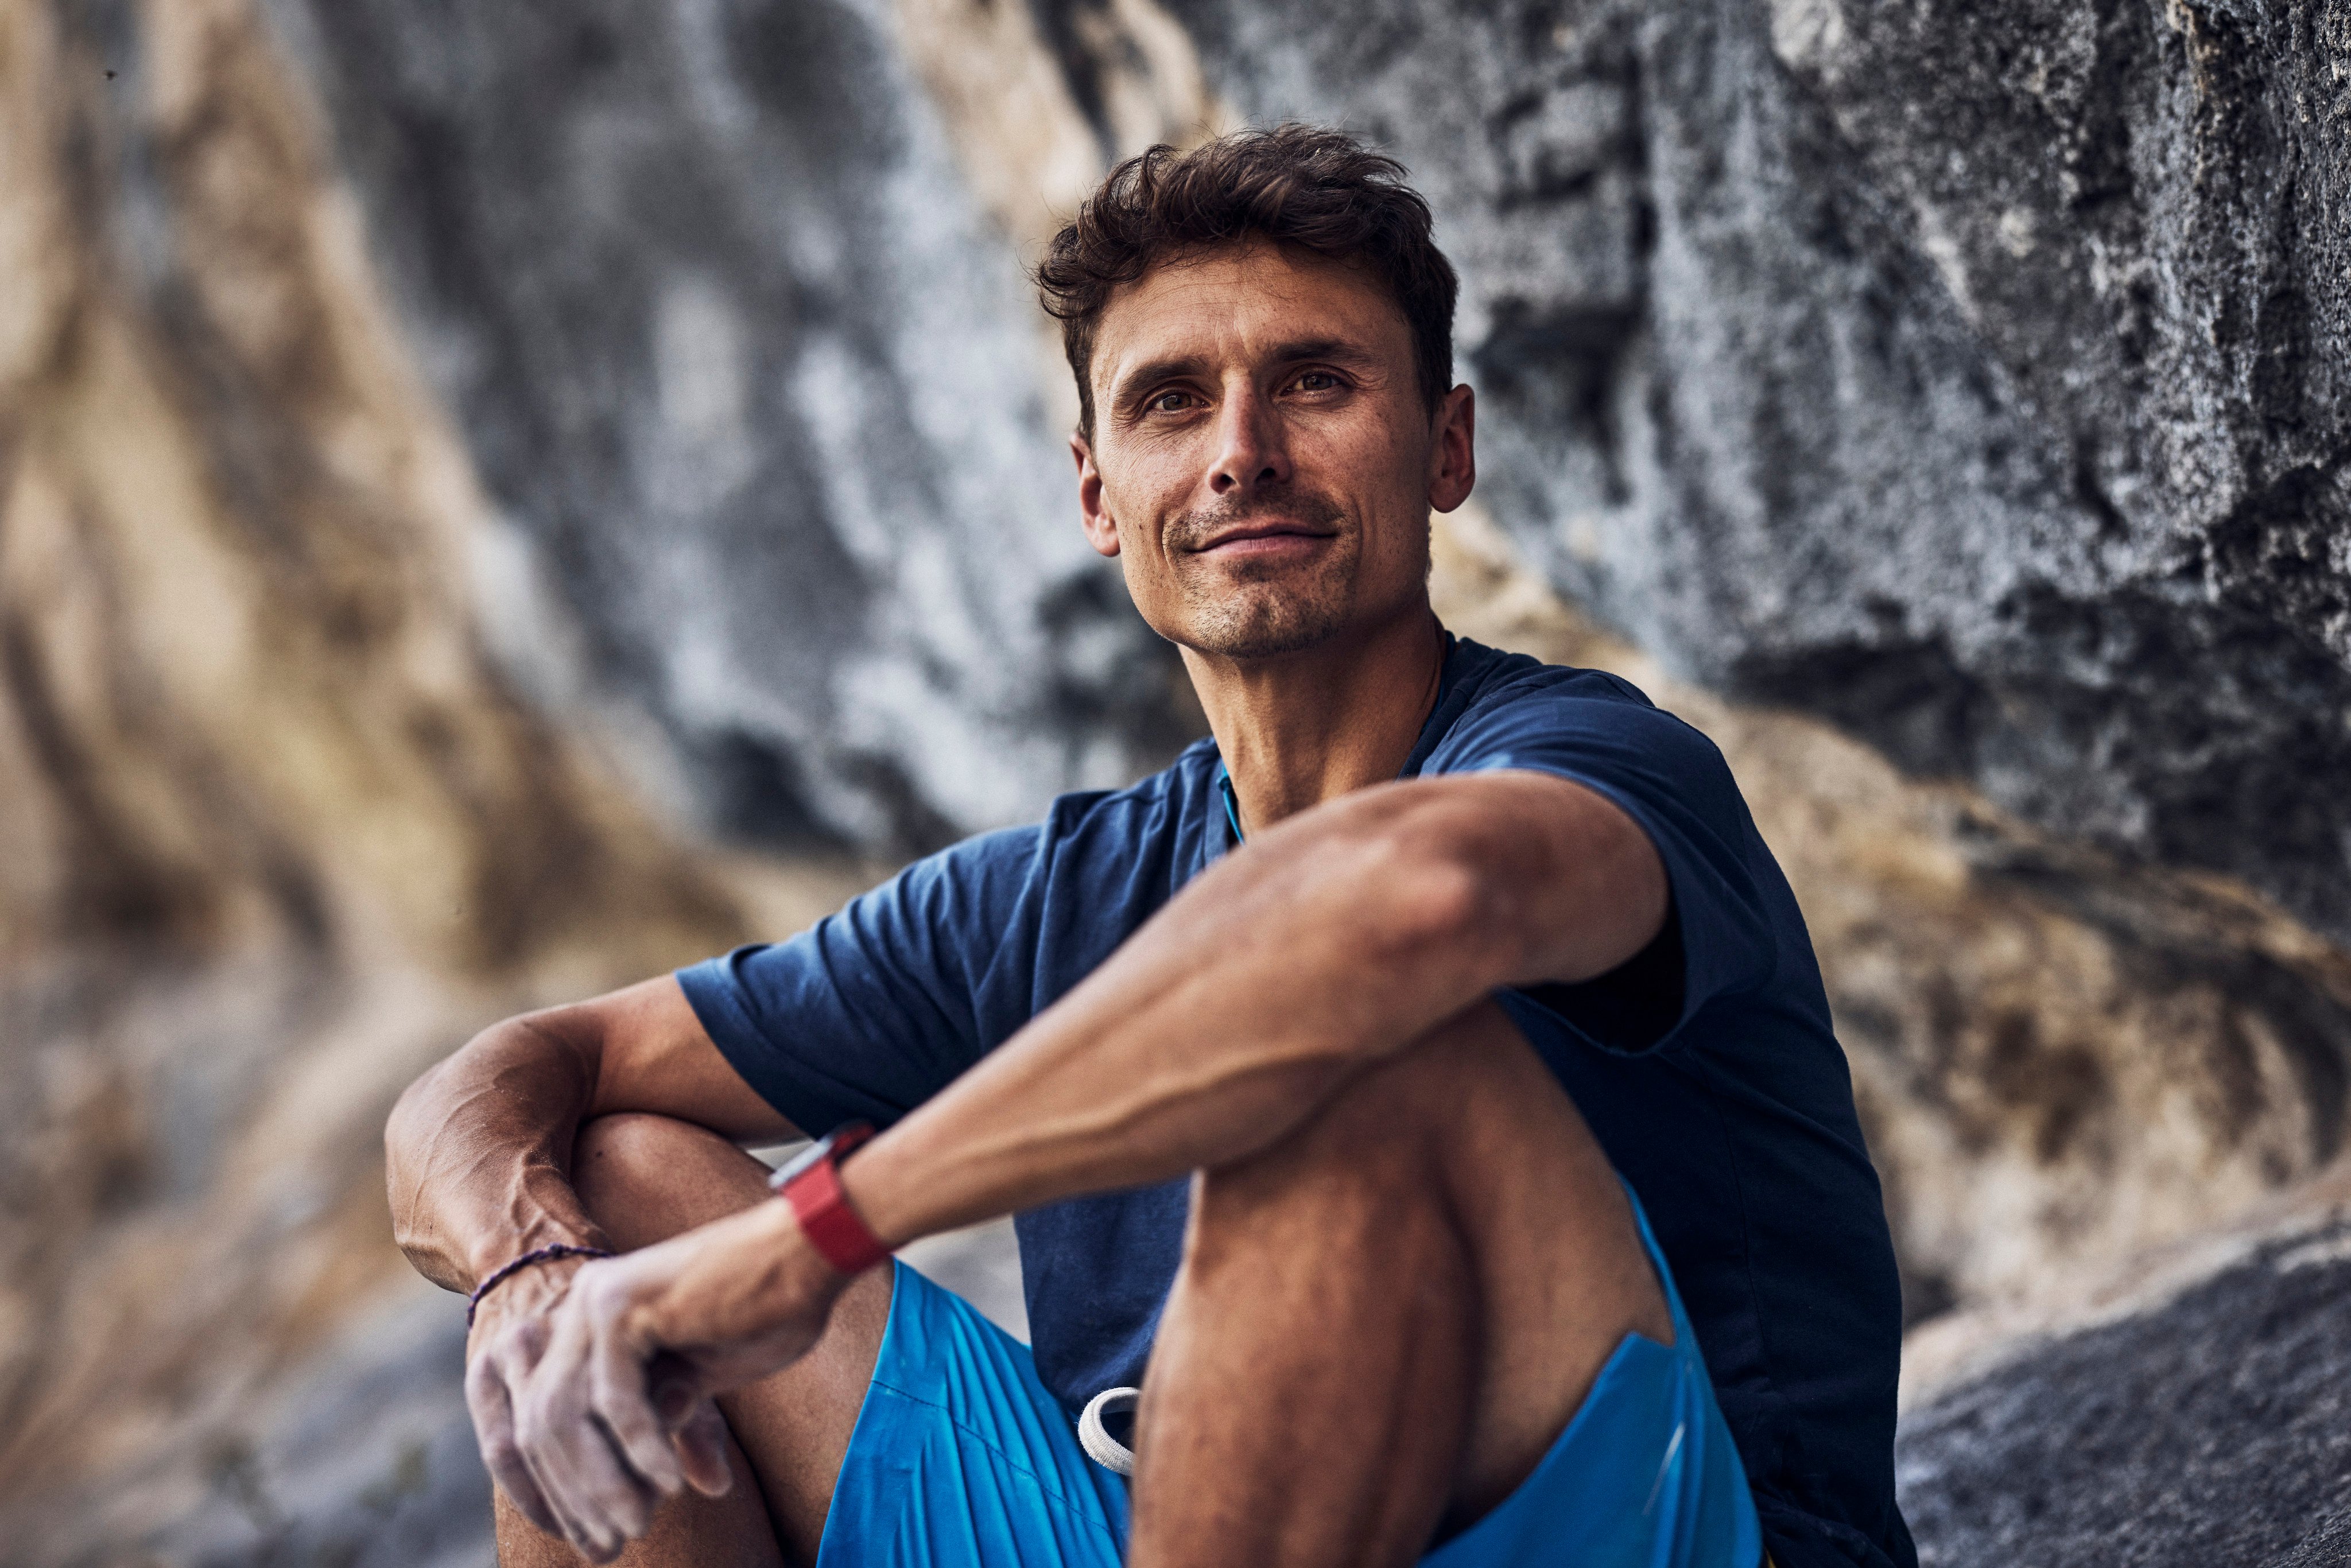 The first mountaineer to join the Richard Mille family, Charles Dubouloz has been added to the likes of Formula 1’s Charles Leclerc, tennis’ Rafael Nadal and golfer Bubba Watson. Photo: Handout